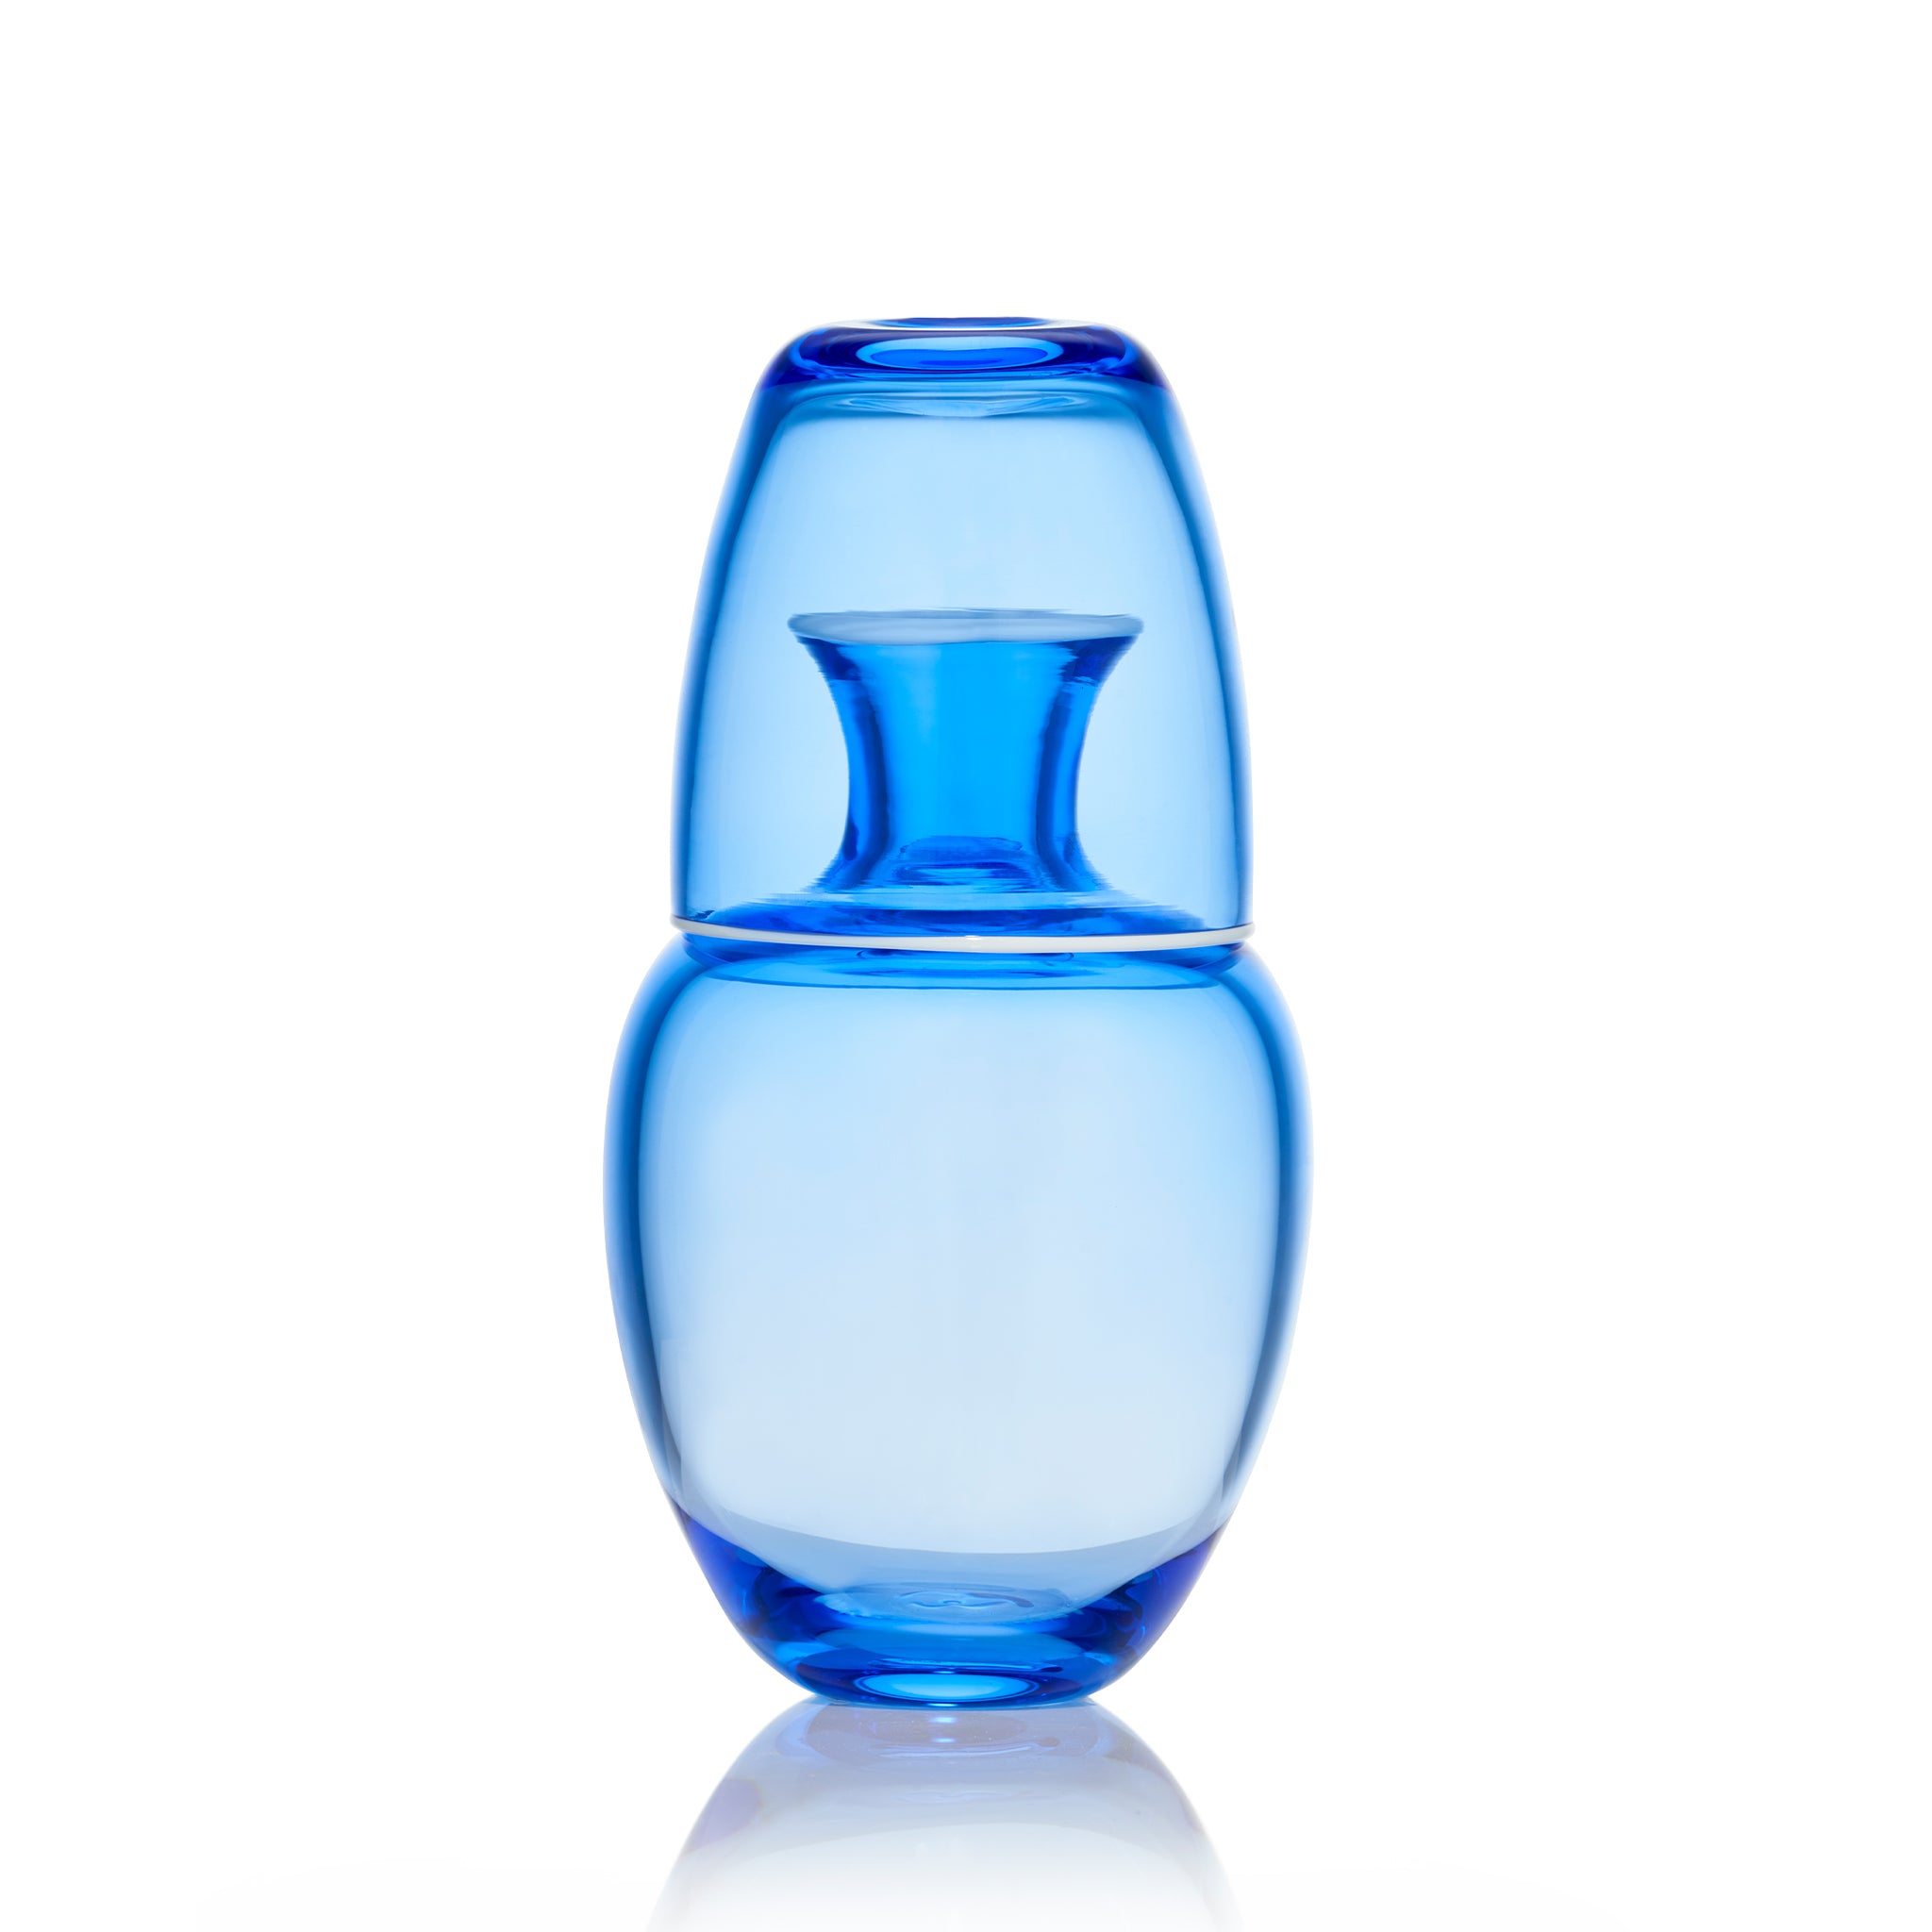 Handblown Glass Bumba Bedside Carafe and Glass Set in Royal Blue, 0.5L